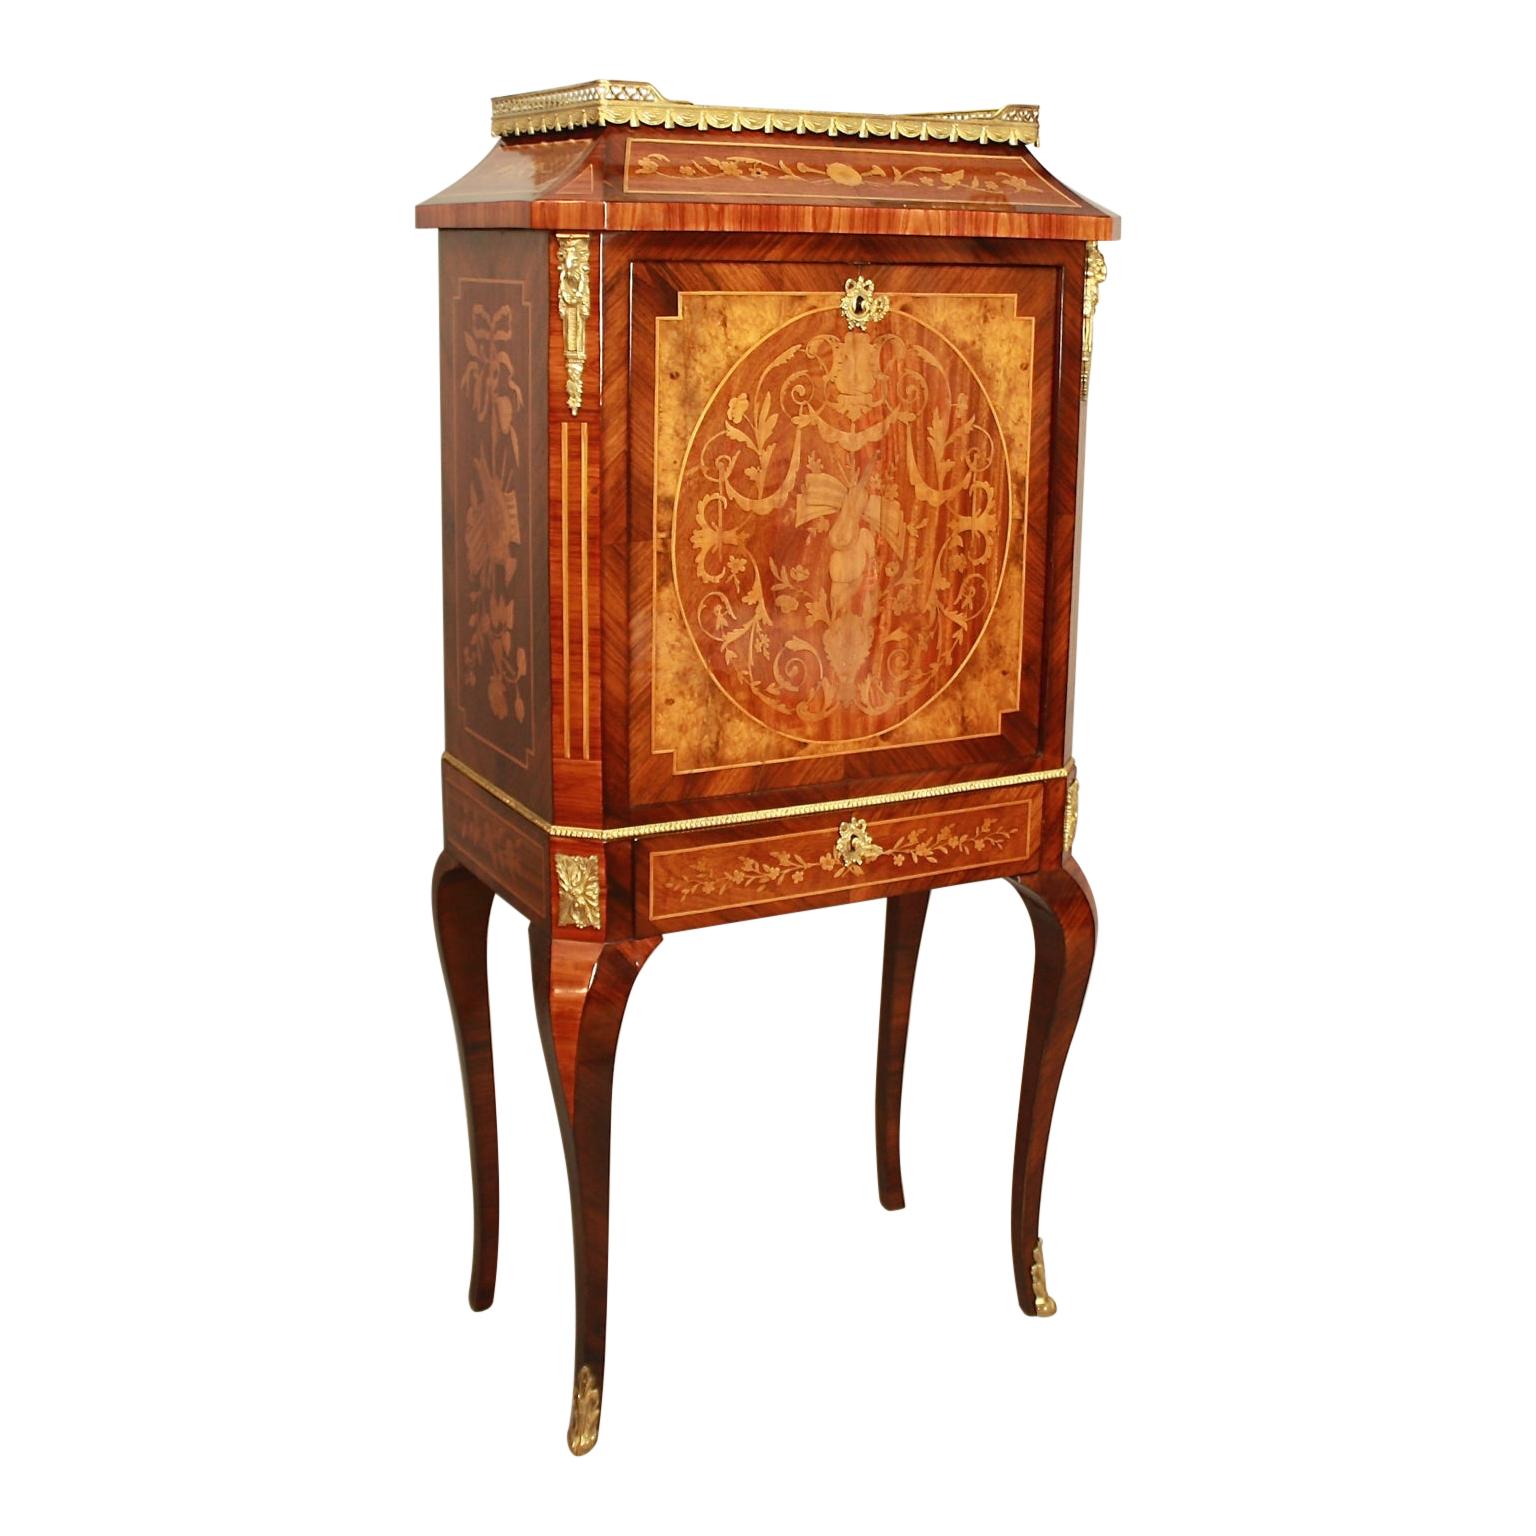 19th Century Louis XVI Floral Marquetry Writing Cabinet or Lady's Secrétaire For Sale